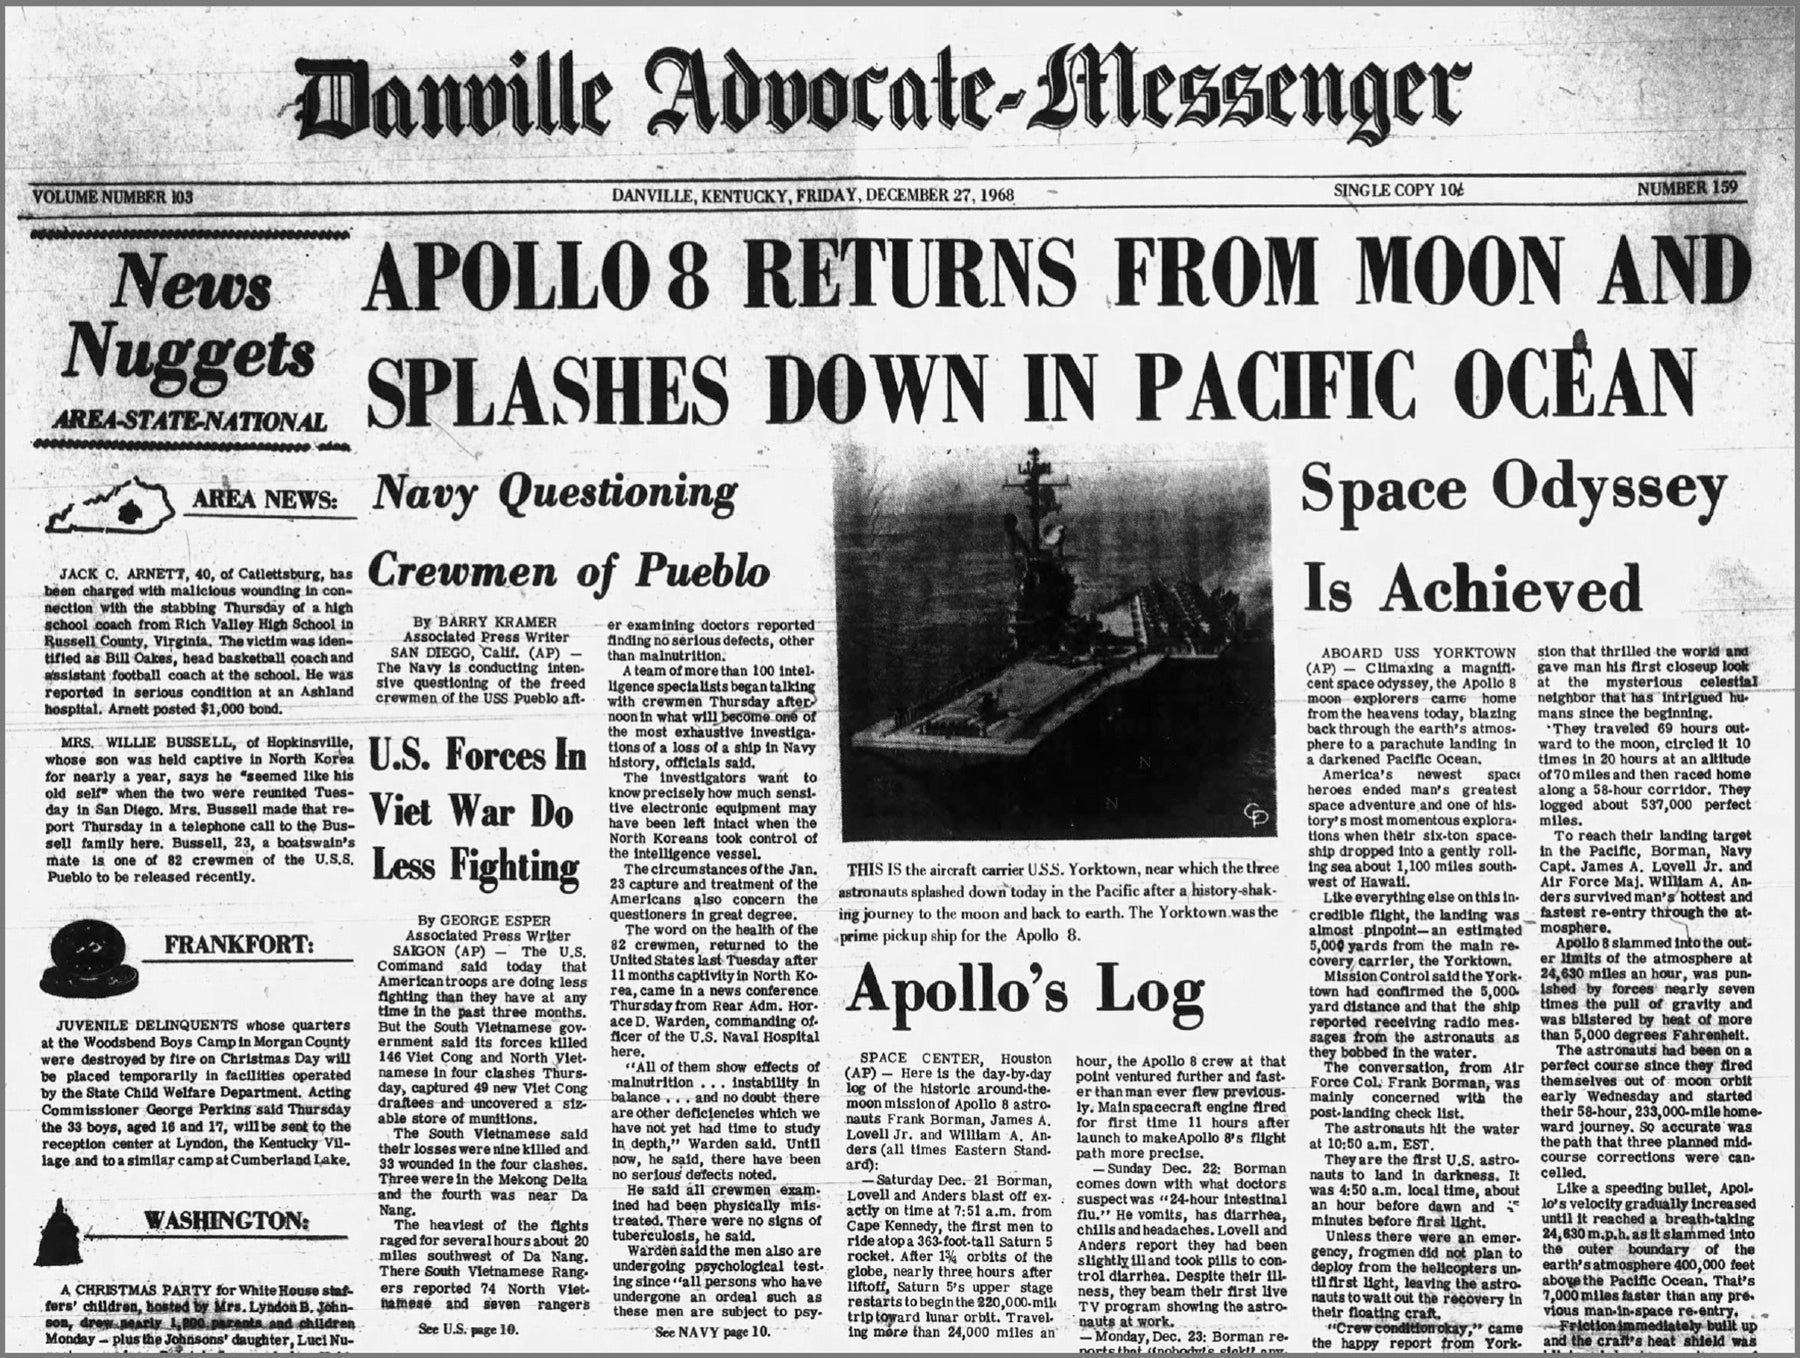 Front page history: Apollo 8 returned to earth 50 years ago today - The Advocate-Messenger | The ...